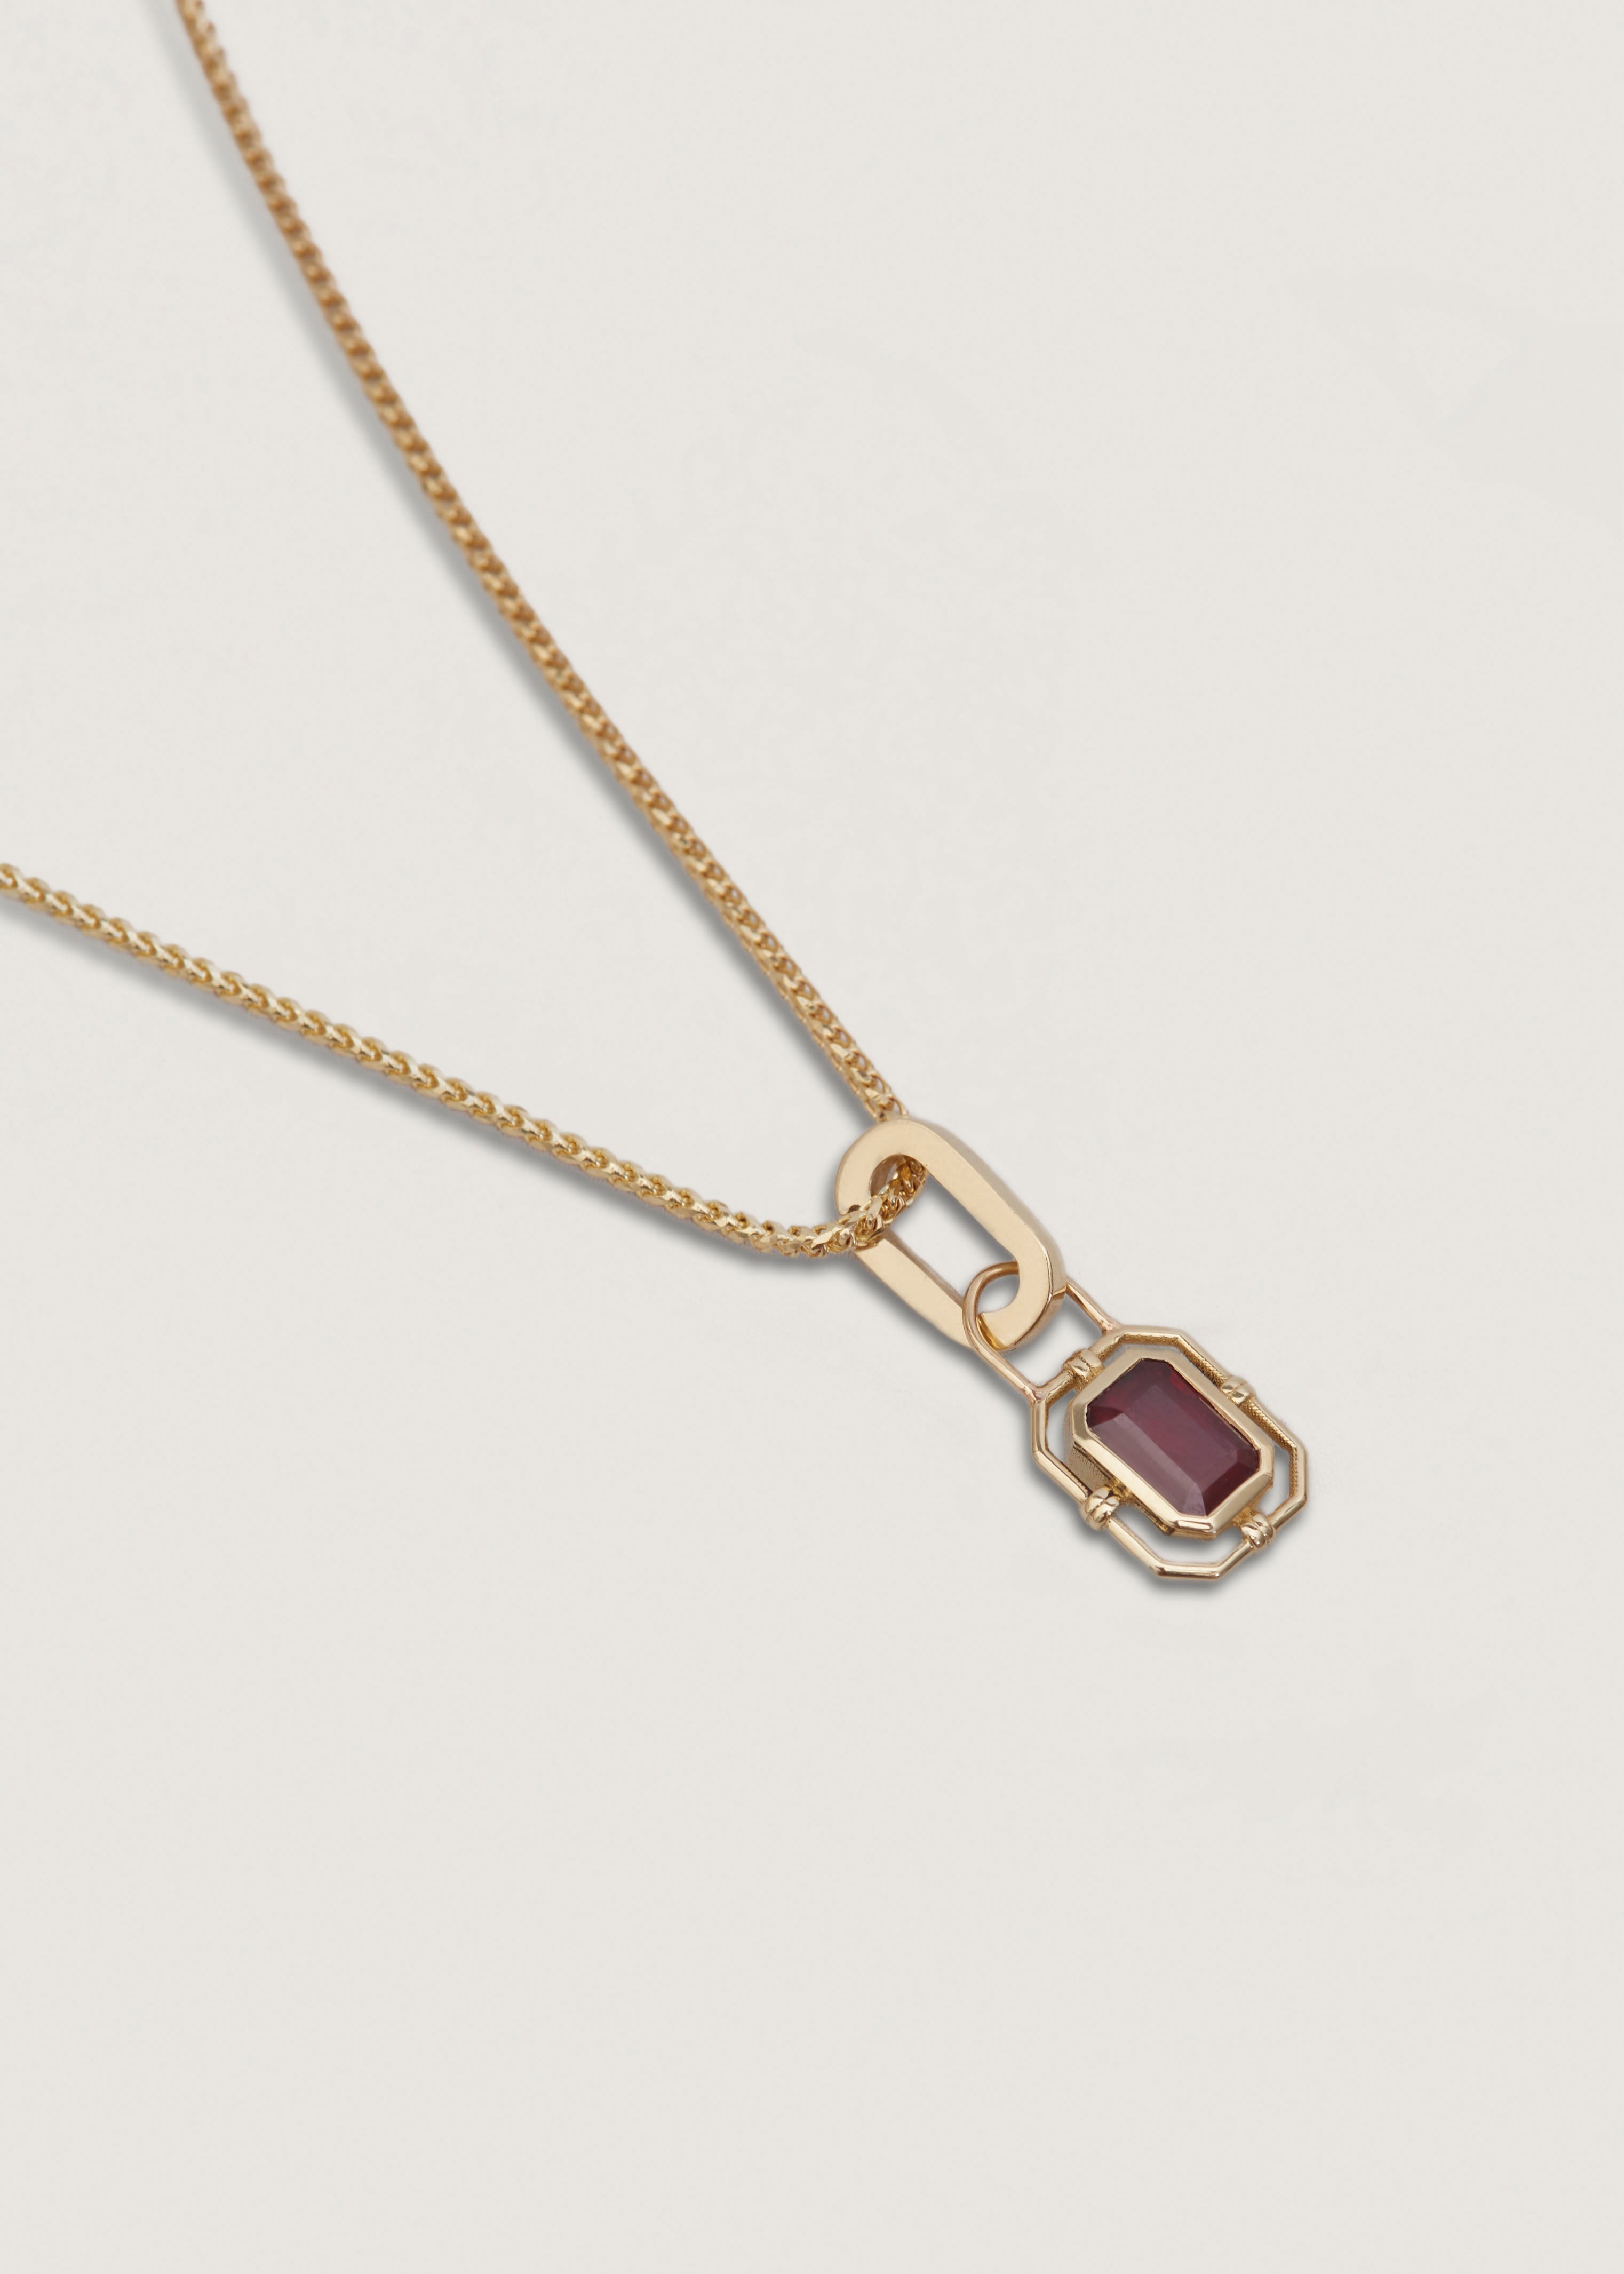 alt="Lyra Baguette Pendant I - Ruby with box chain"